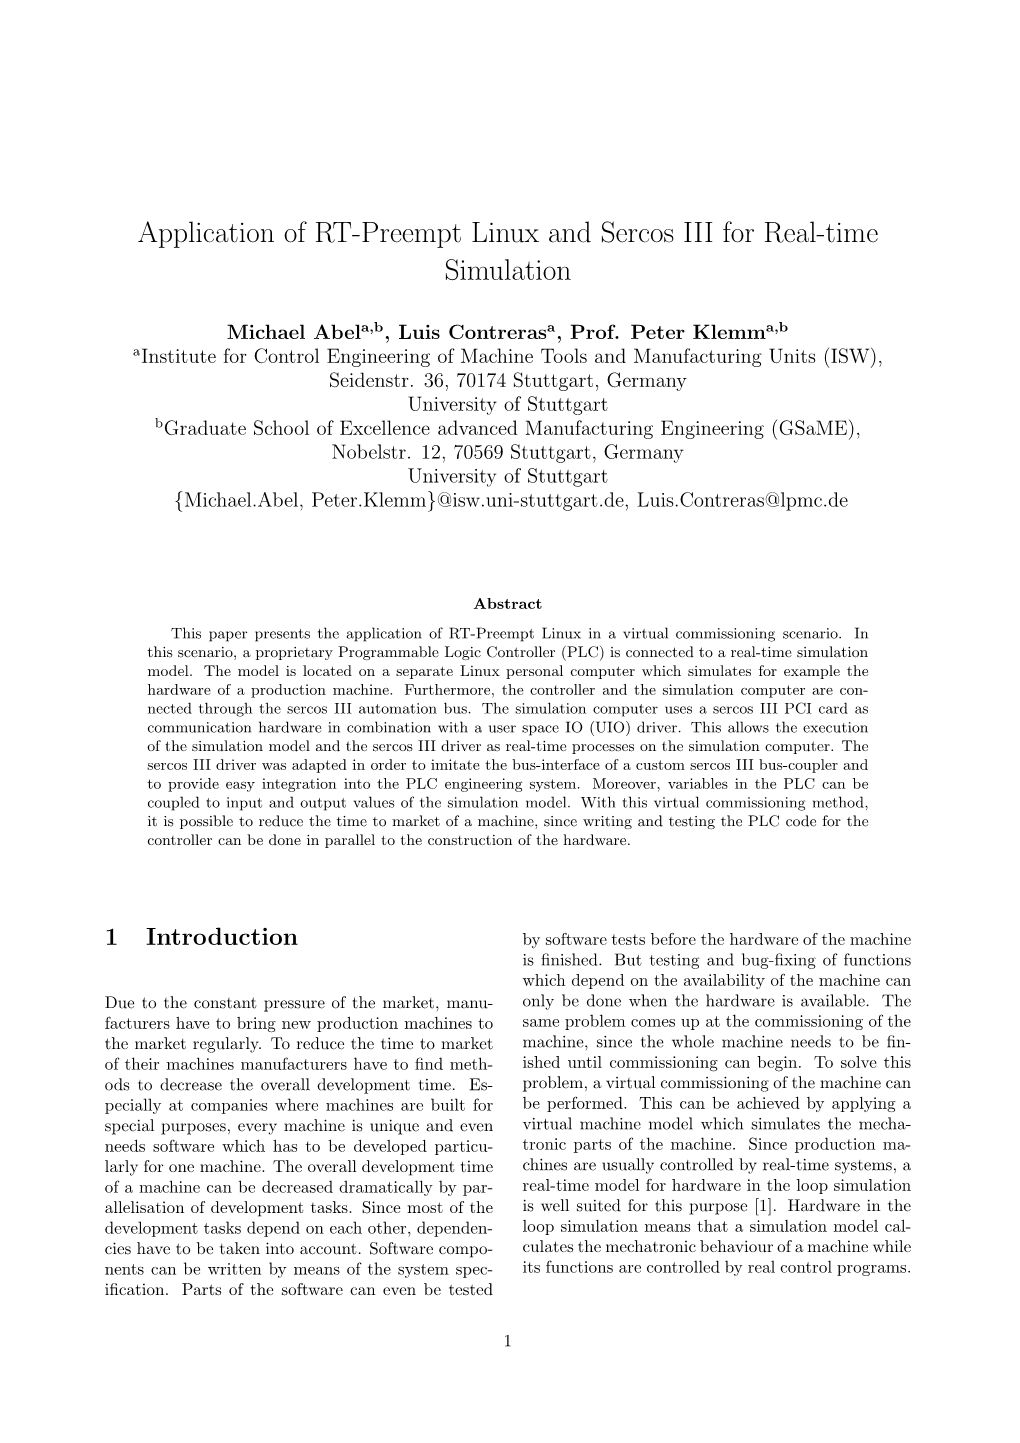 Application of RT-Preempt Linux and Sercos III for Real-Time Simulation